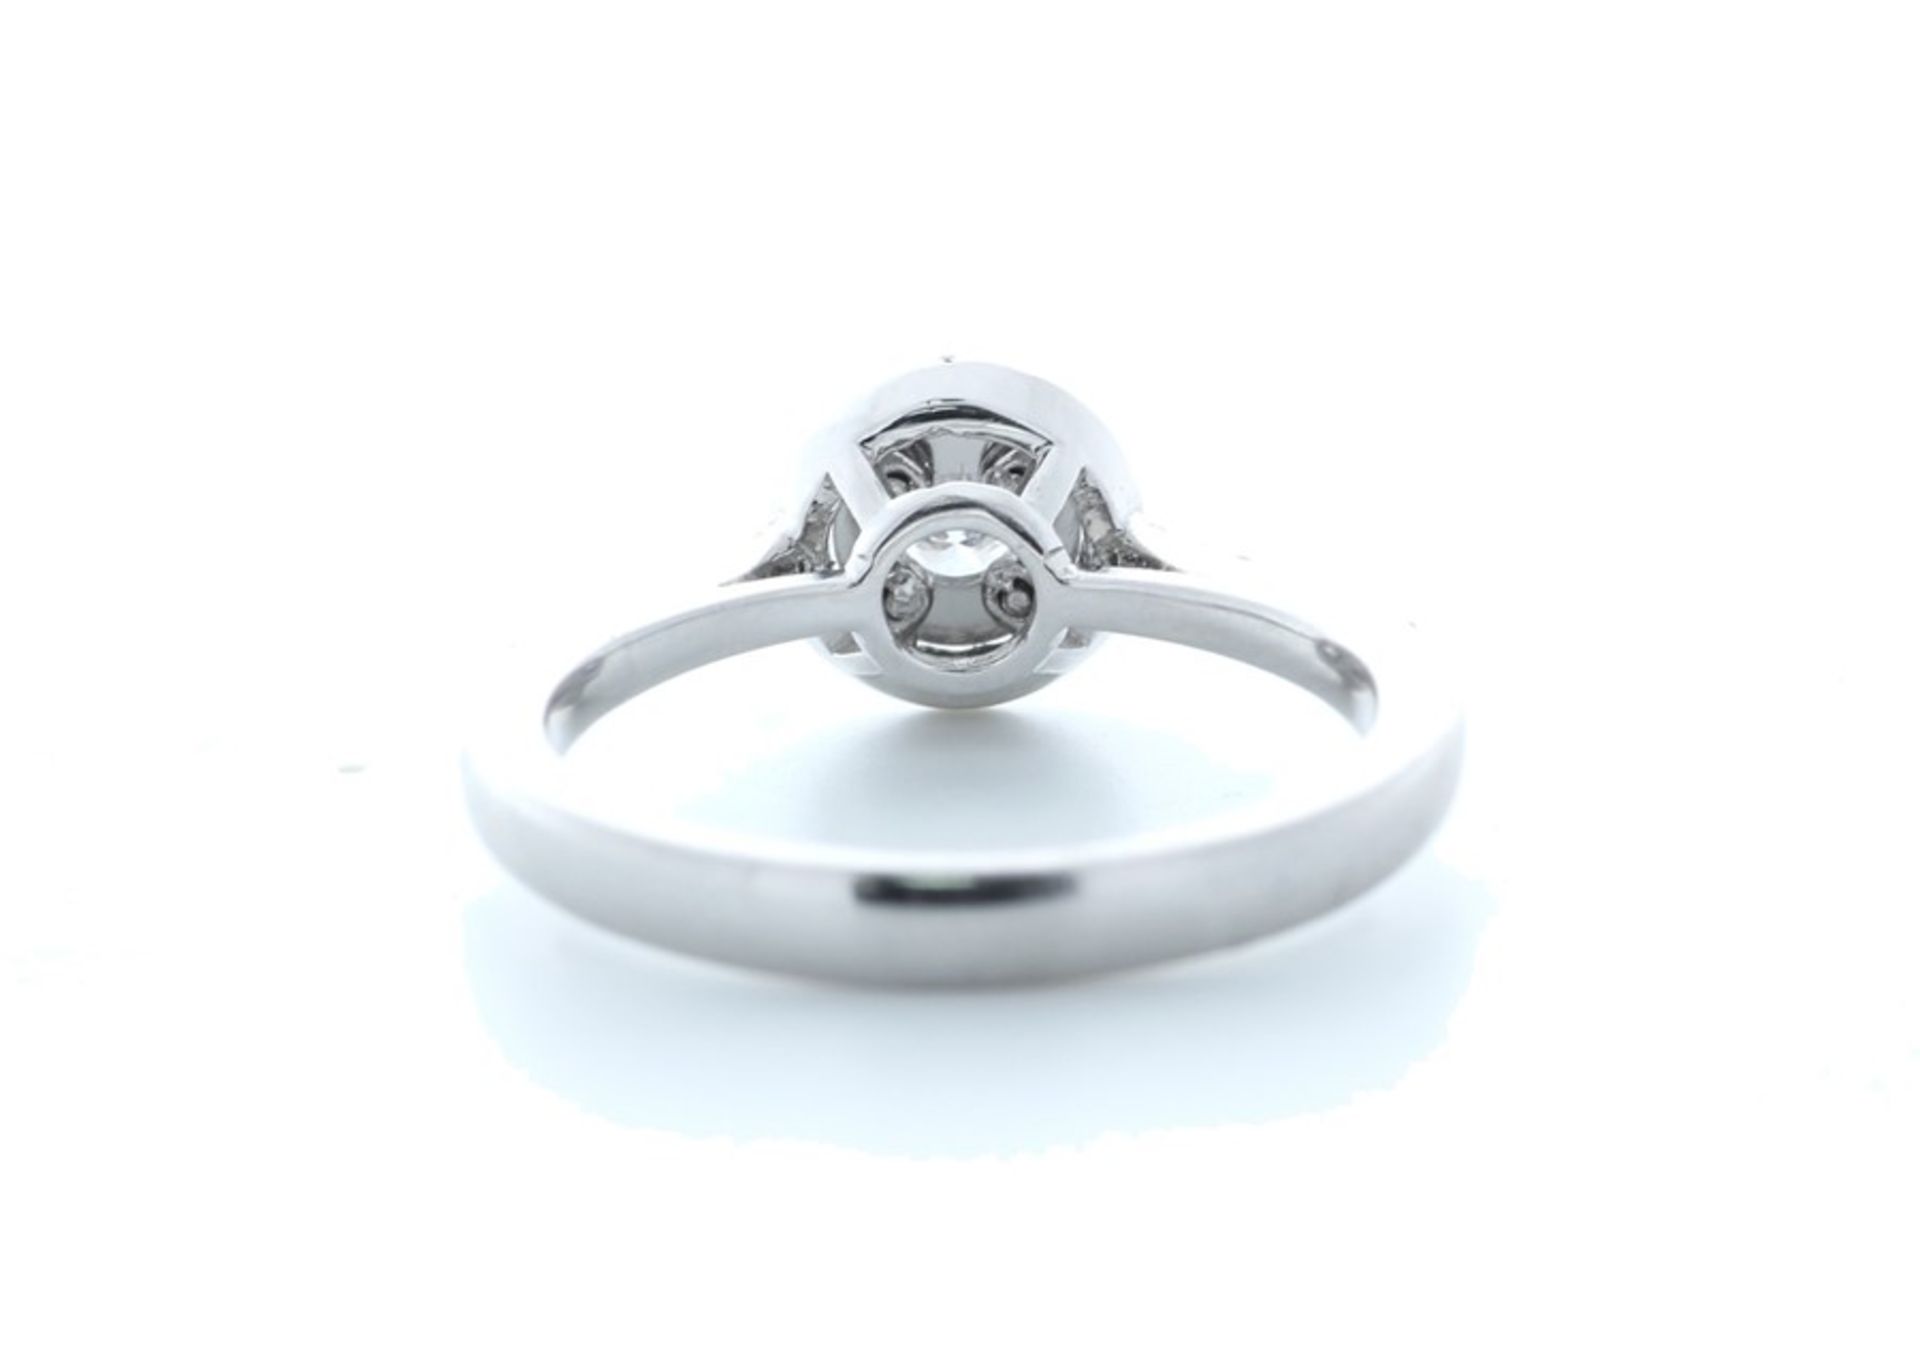 18ct White Gold Single Stone With Halo Setting Ring Valued by IDI £3,500.00 - Image 3 of 5